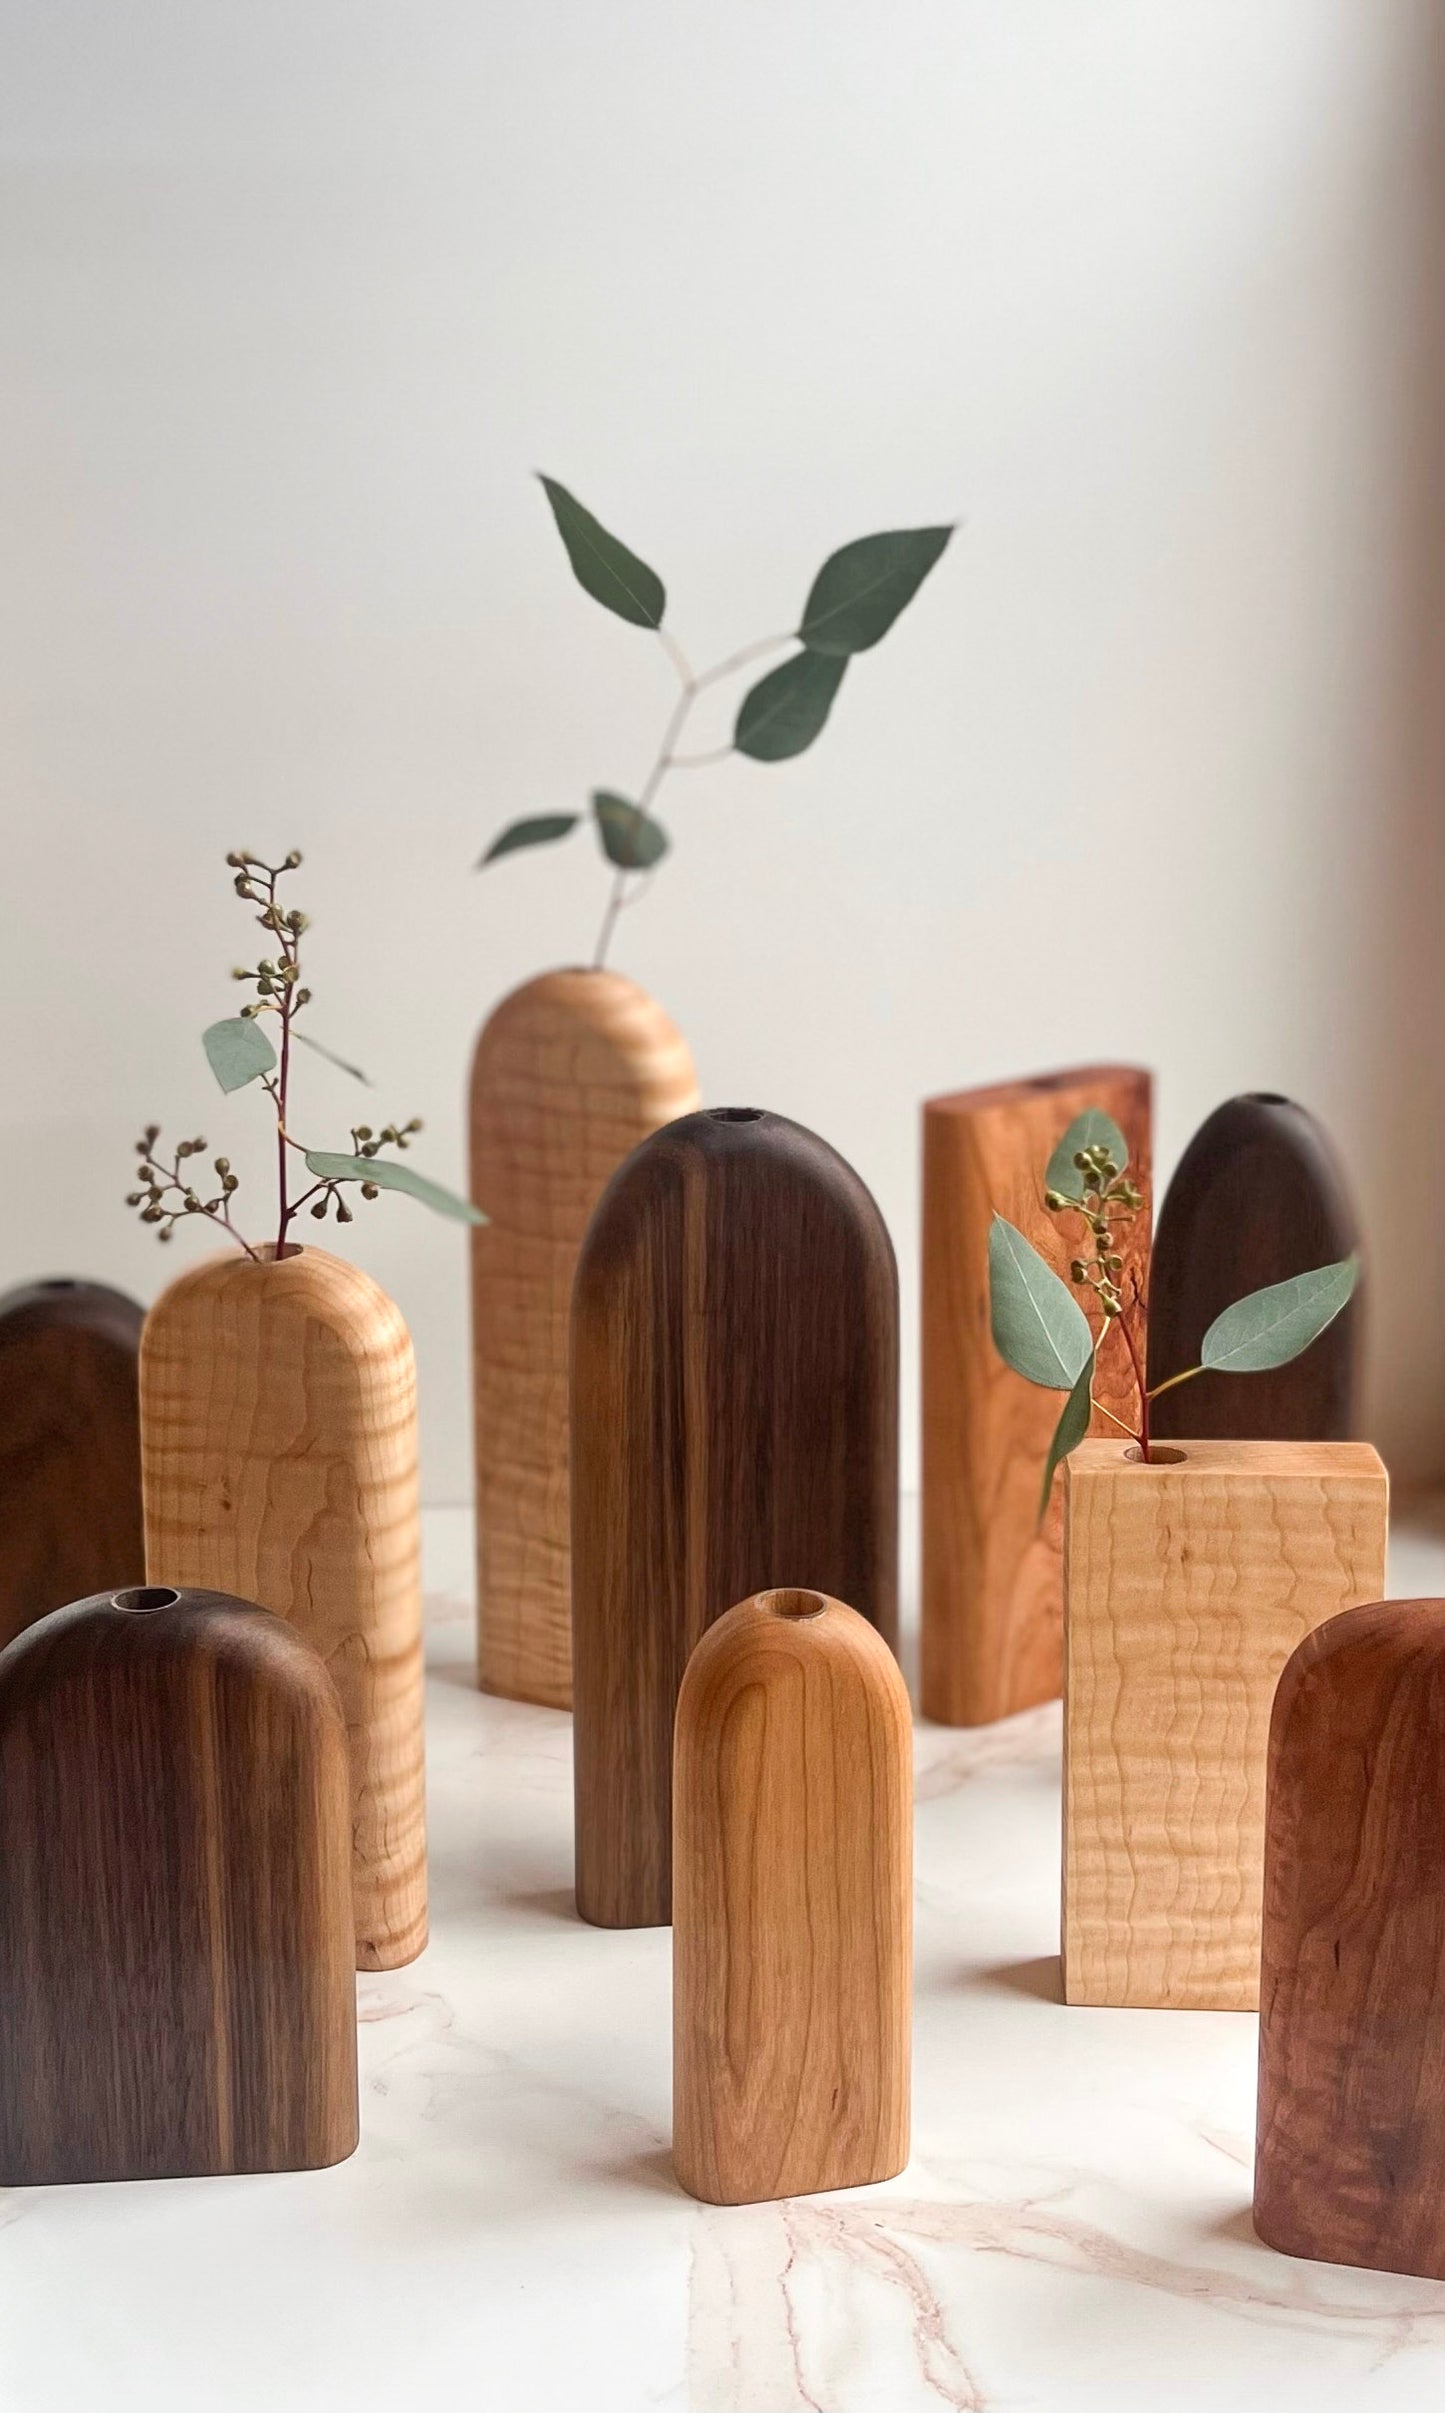 Rounded top and rectangle organic bud/flower vases in all different variations of light and dark wood handmade by Camino Woodshop, making the perfect decor for your home or gift for friends and family